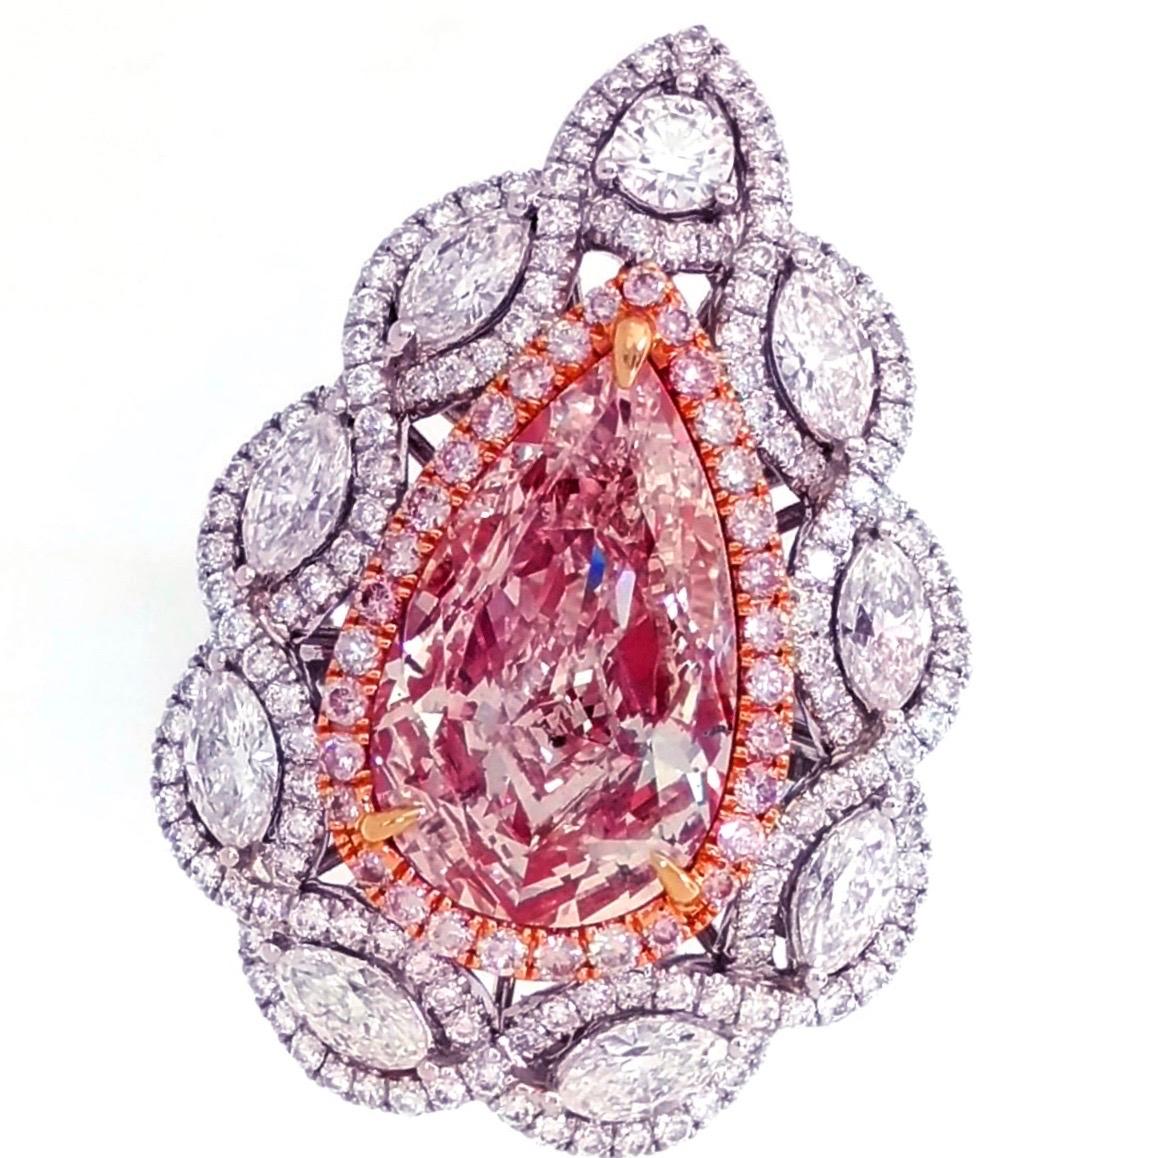 From the Emilio Jewelry Vault, We are Showcasing a Gia certified 4 carat+ natural fancy brownish pink diamond in the center.
This piece was Hand made in the Emilio Jewelry Atelier, whom specializes in rare collectible pieces in natural Fancy colored